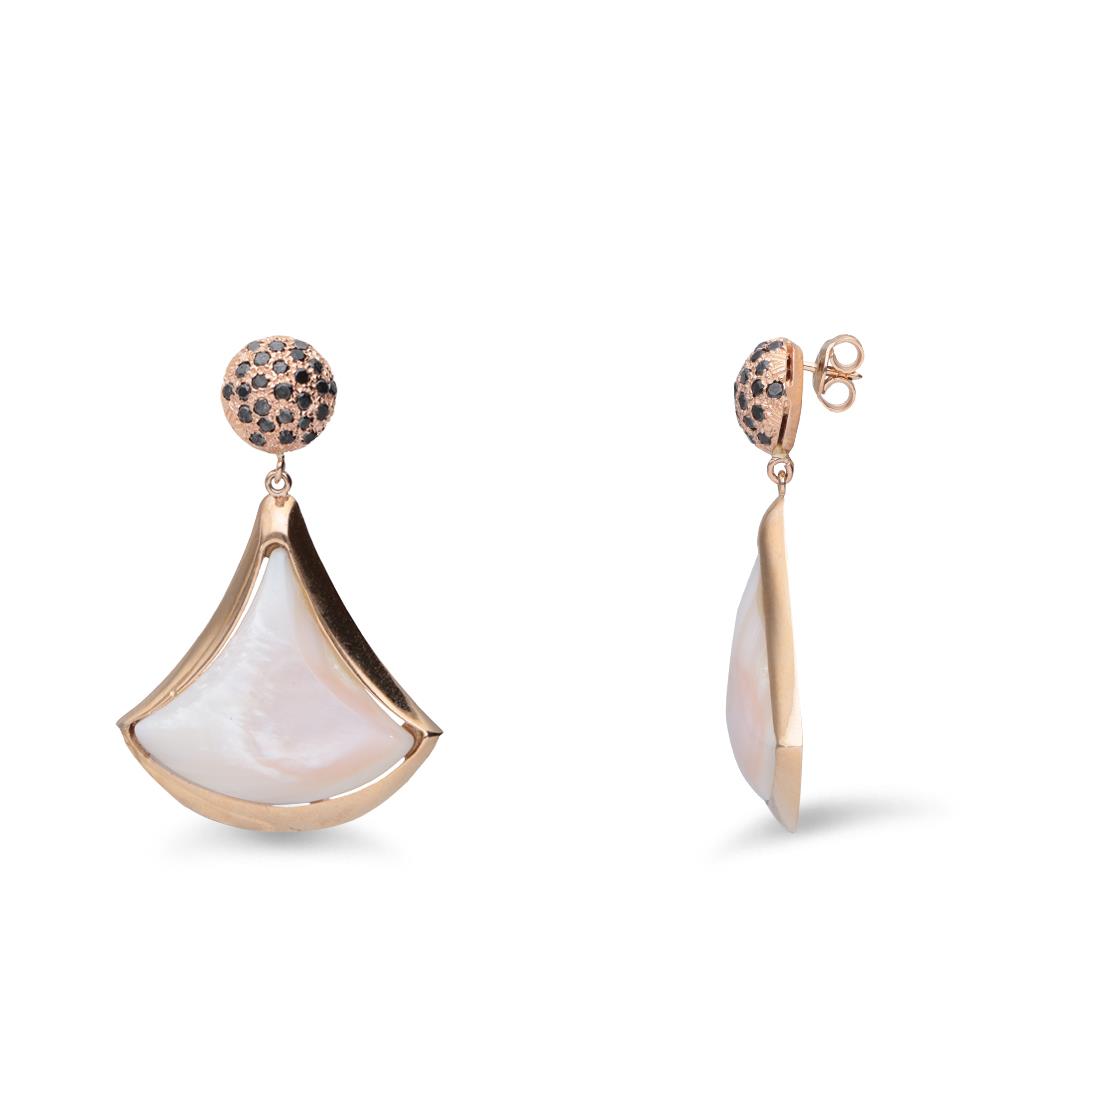 Rose gold pendant earrings with black diamond and pink mother-of-pearl - STANOPPI